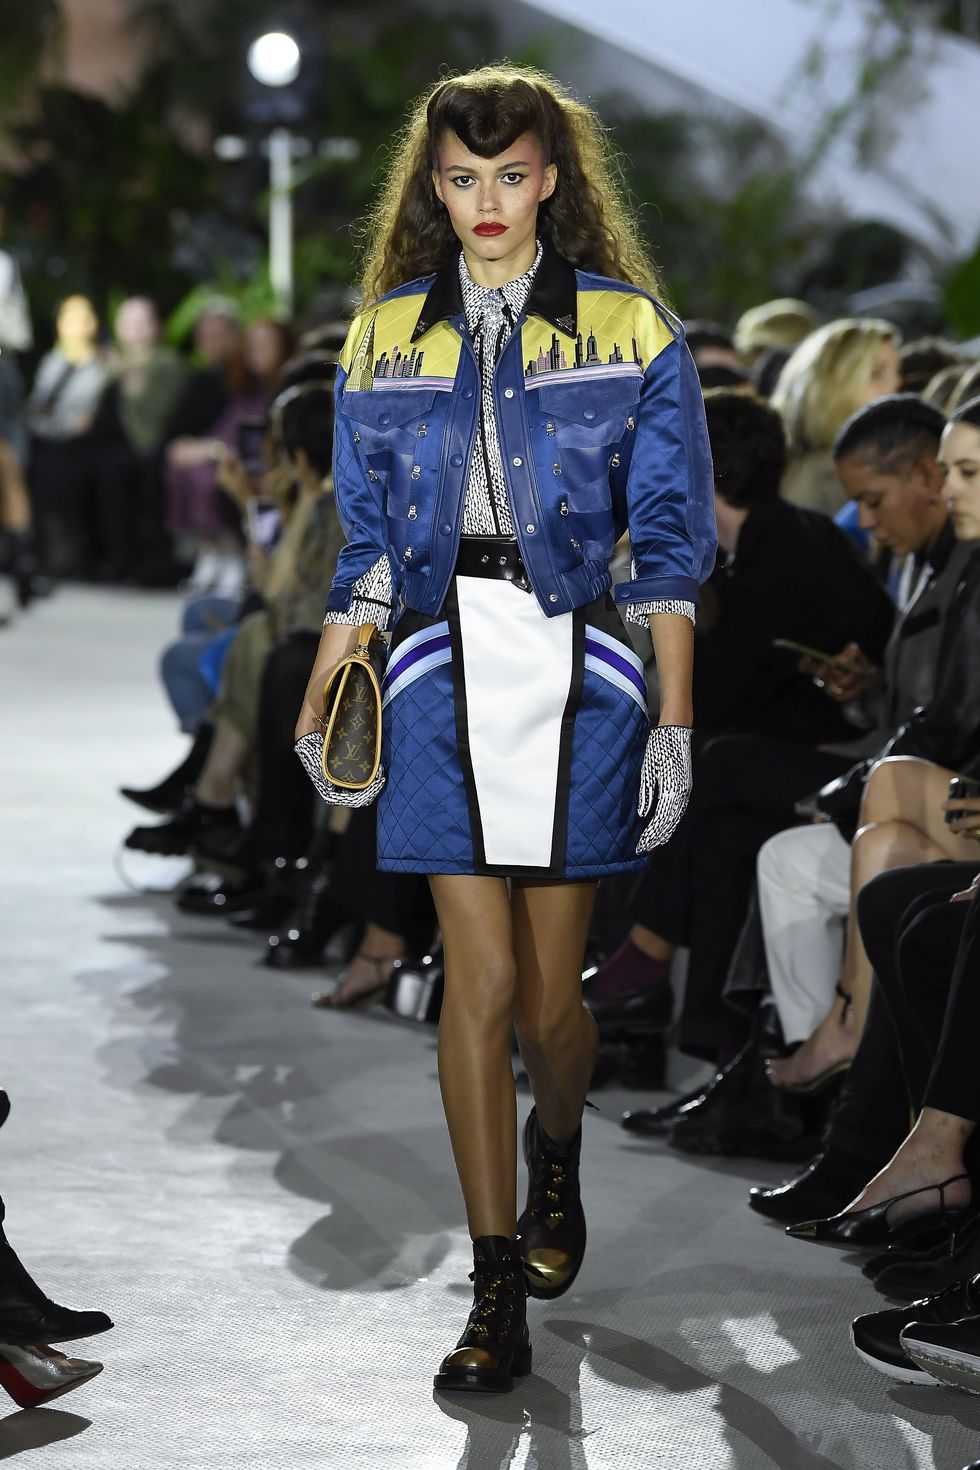 Louis Vuitton hosts Cruise Collection 2019 runway show